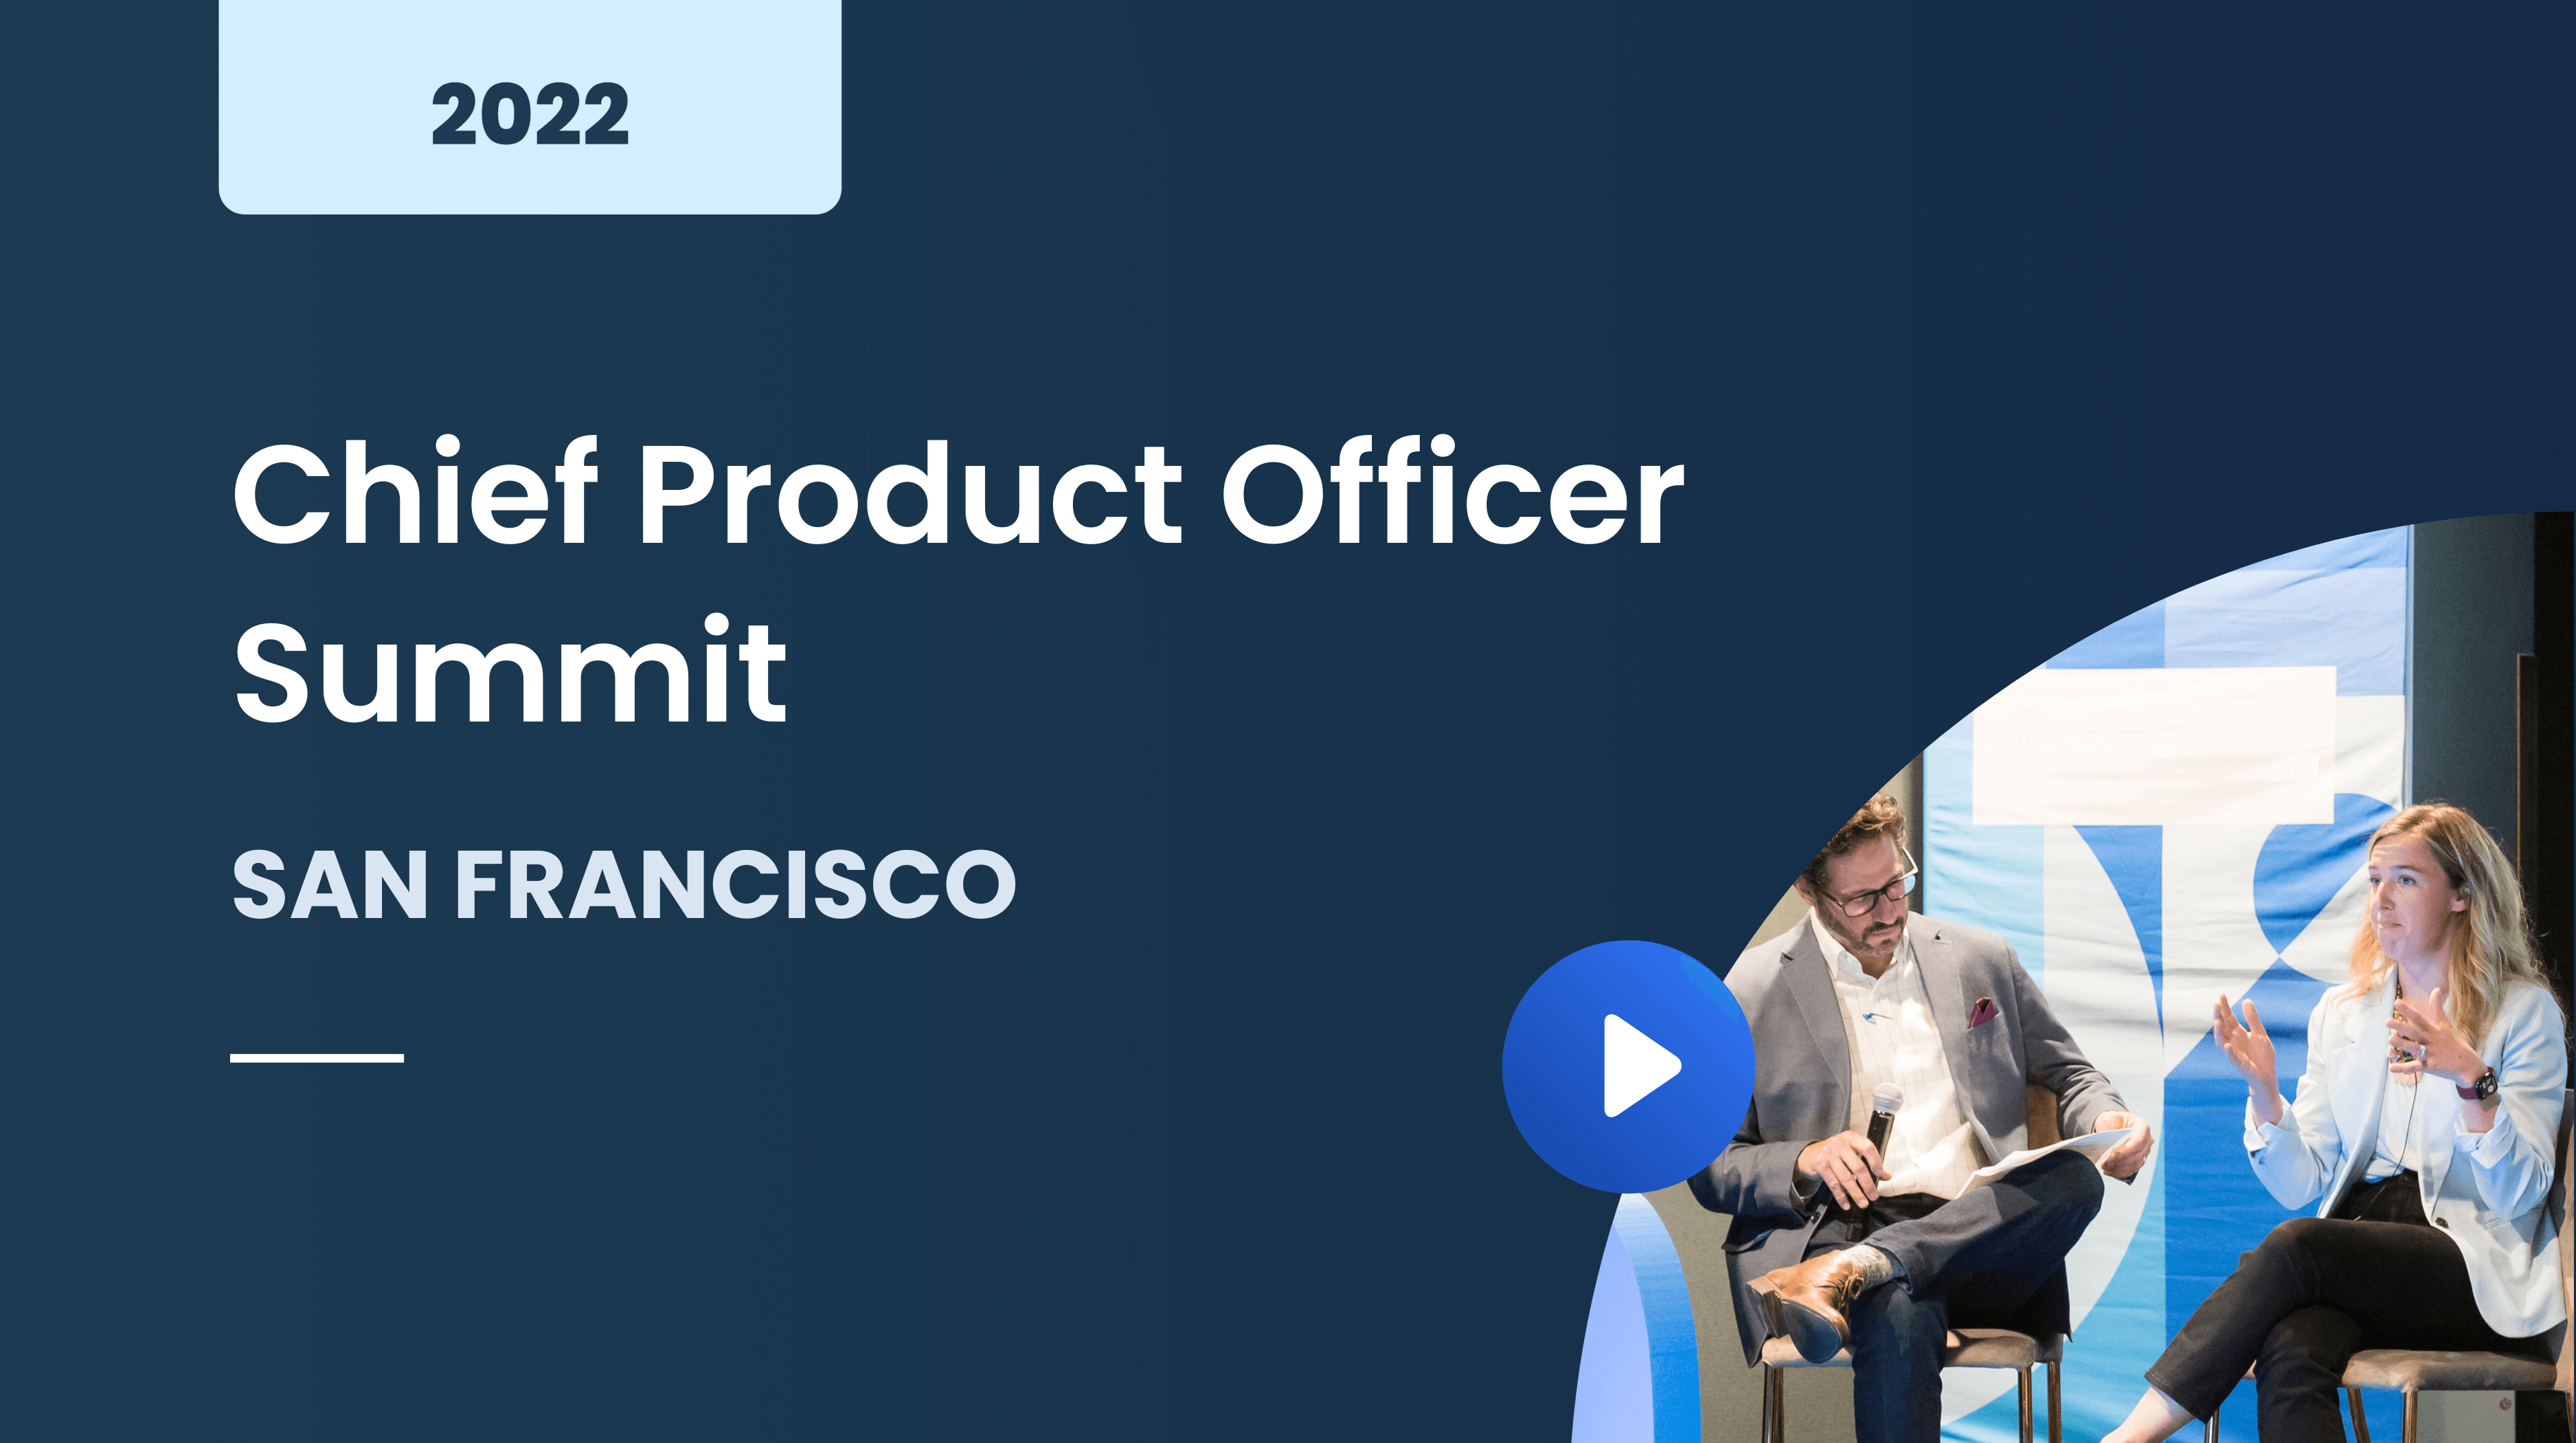 Chief Product Officer Summit San Francisco 2022